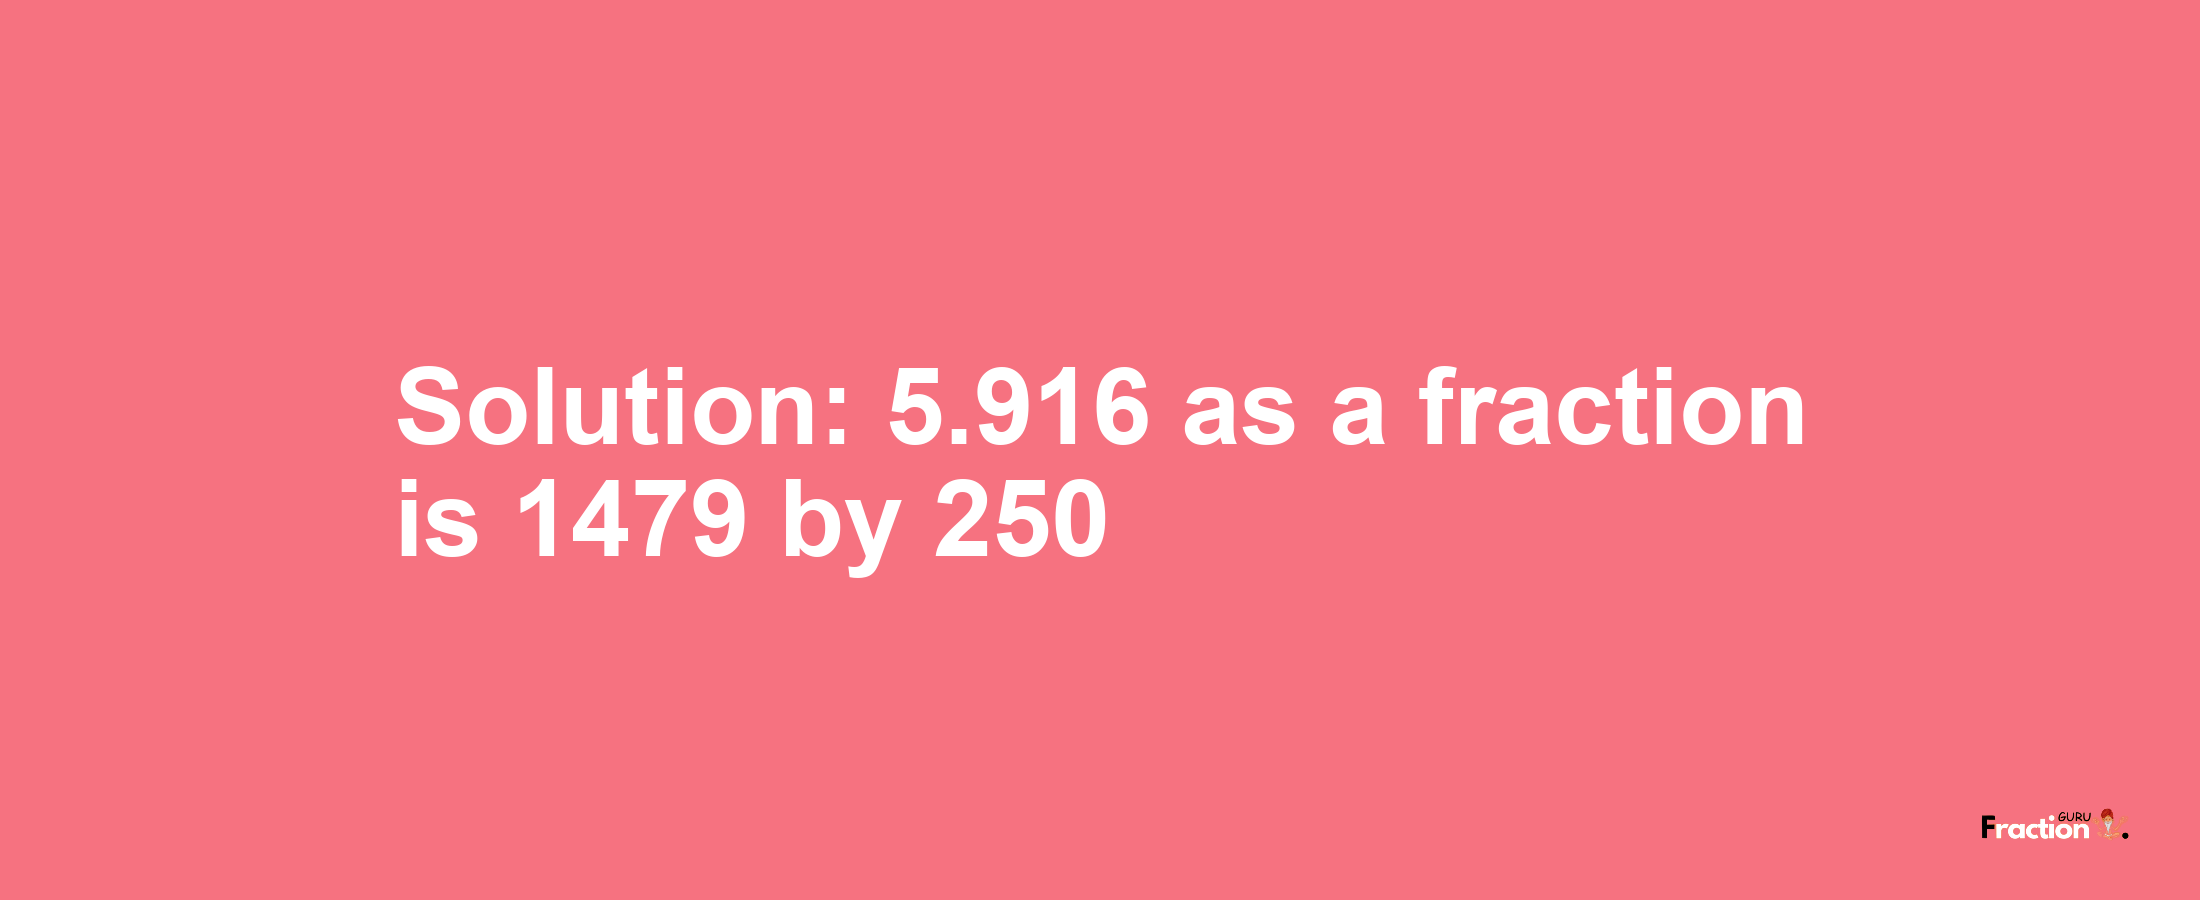 Solution:5.916 as a fraction is 1479/250